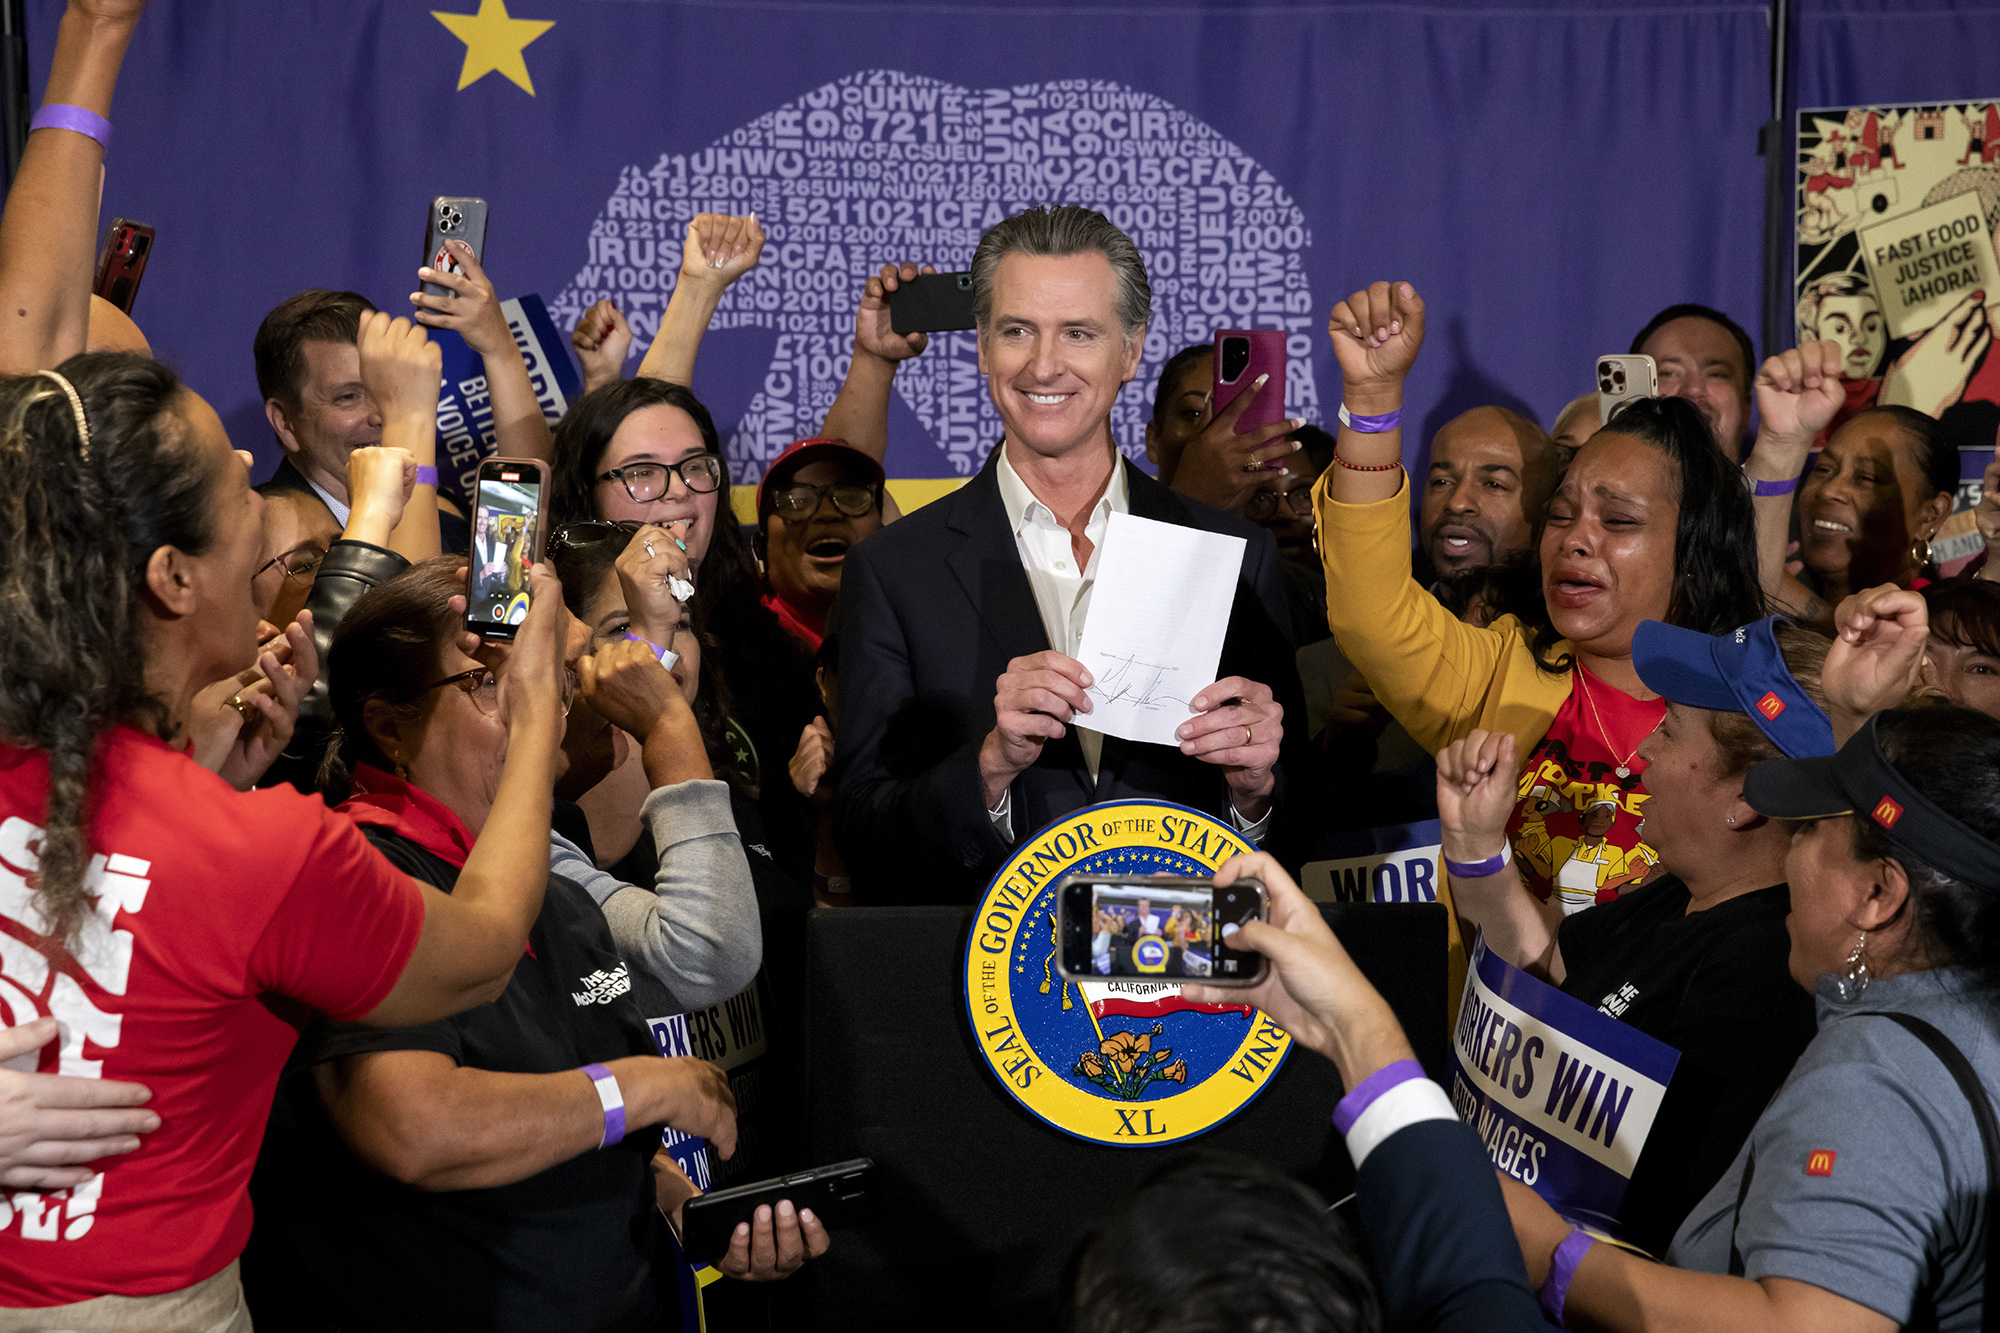 Gov. Gavin Newsom is speaking at a podium, smiling, surrounded by press and cheering people.